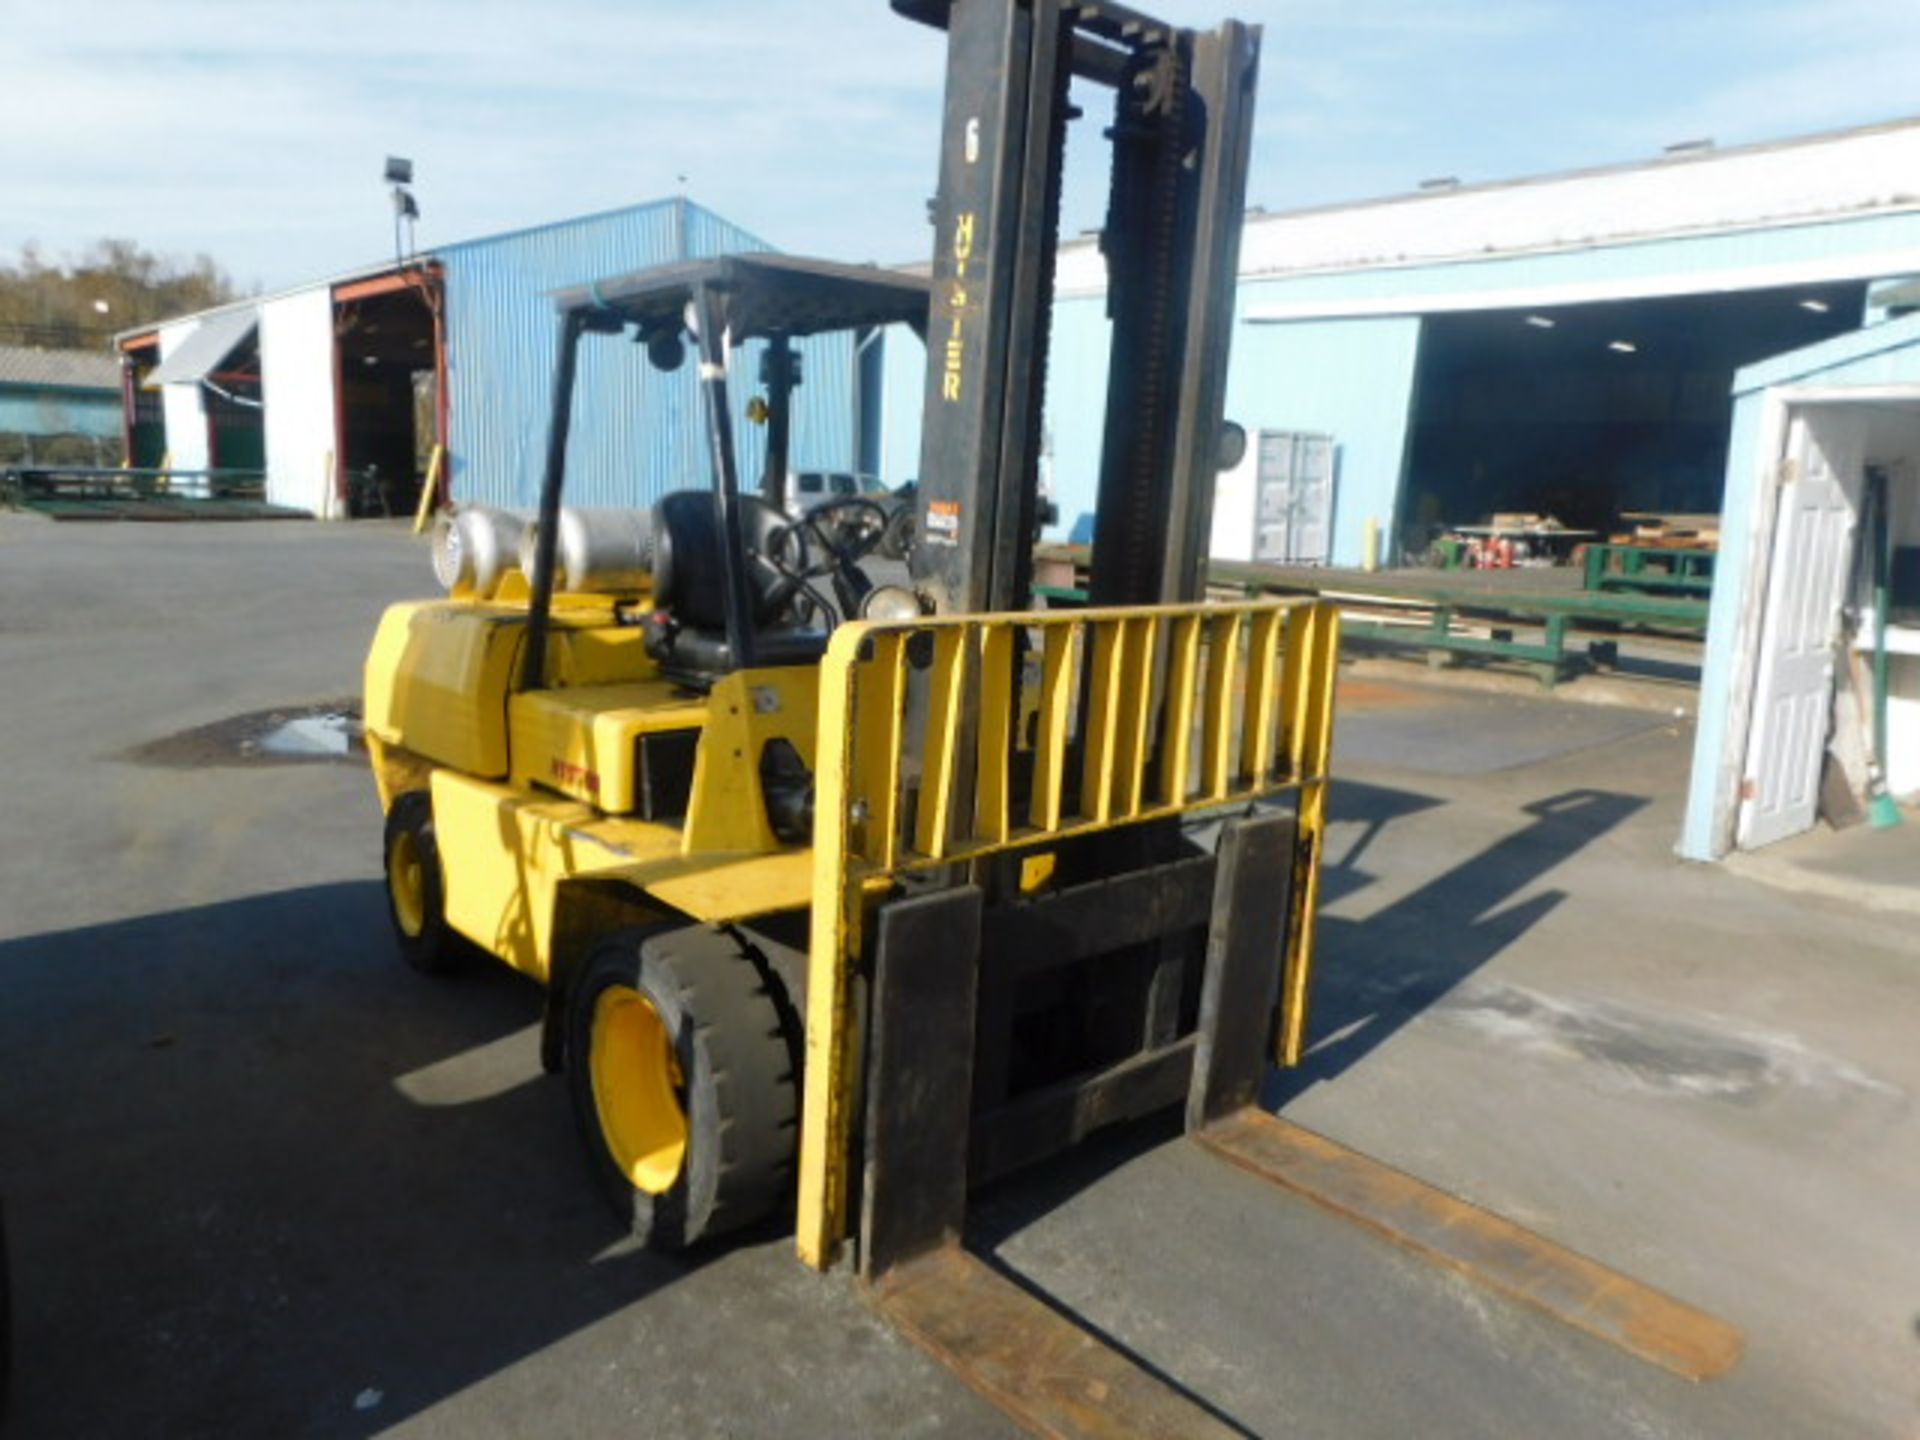 HYSTER H110XL 11,000LB FORKLIFT, LPG, DUAL FRONT TIRES, S/N 3365V (SOLD SUBJECT TO STAYING TO ASSIST